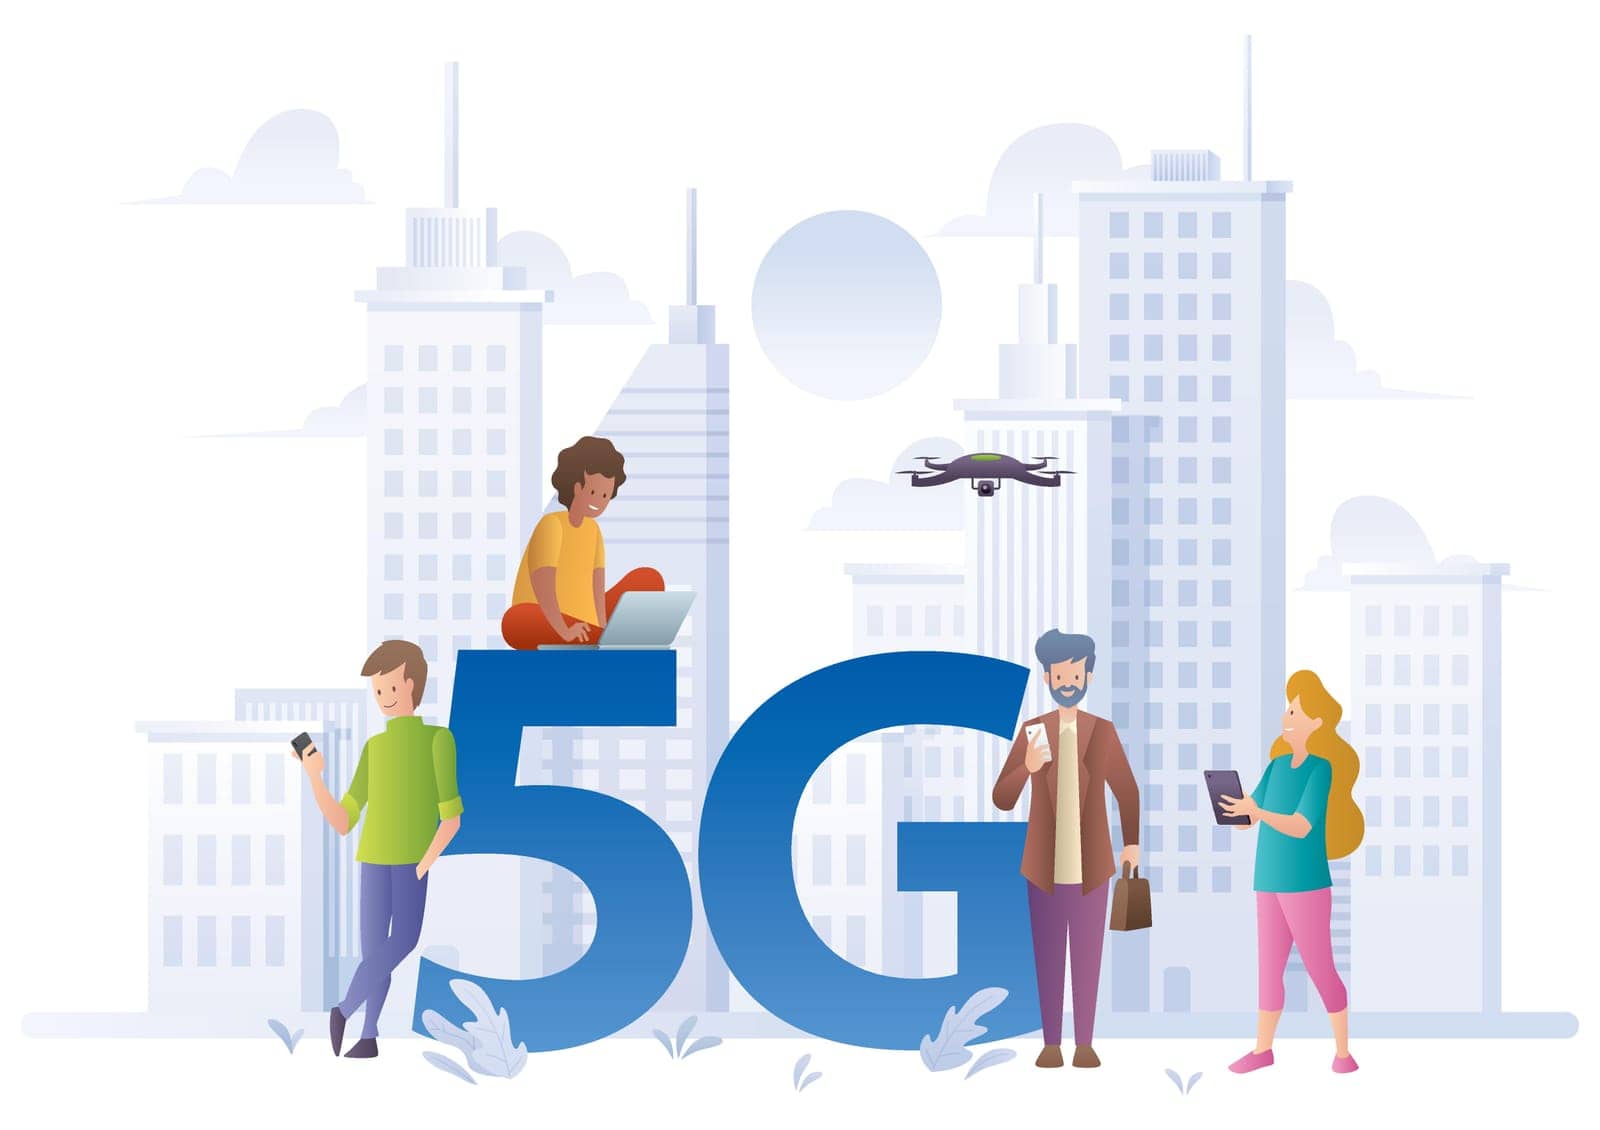 Flat design concept illustration for 5G technology, with people using gadgets with high-speed internet.